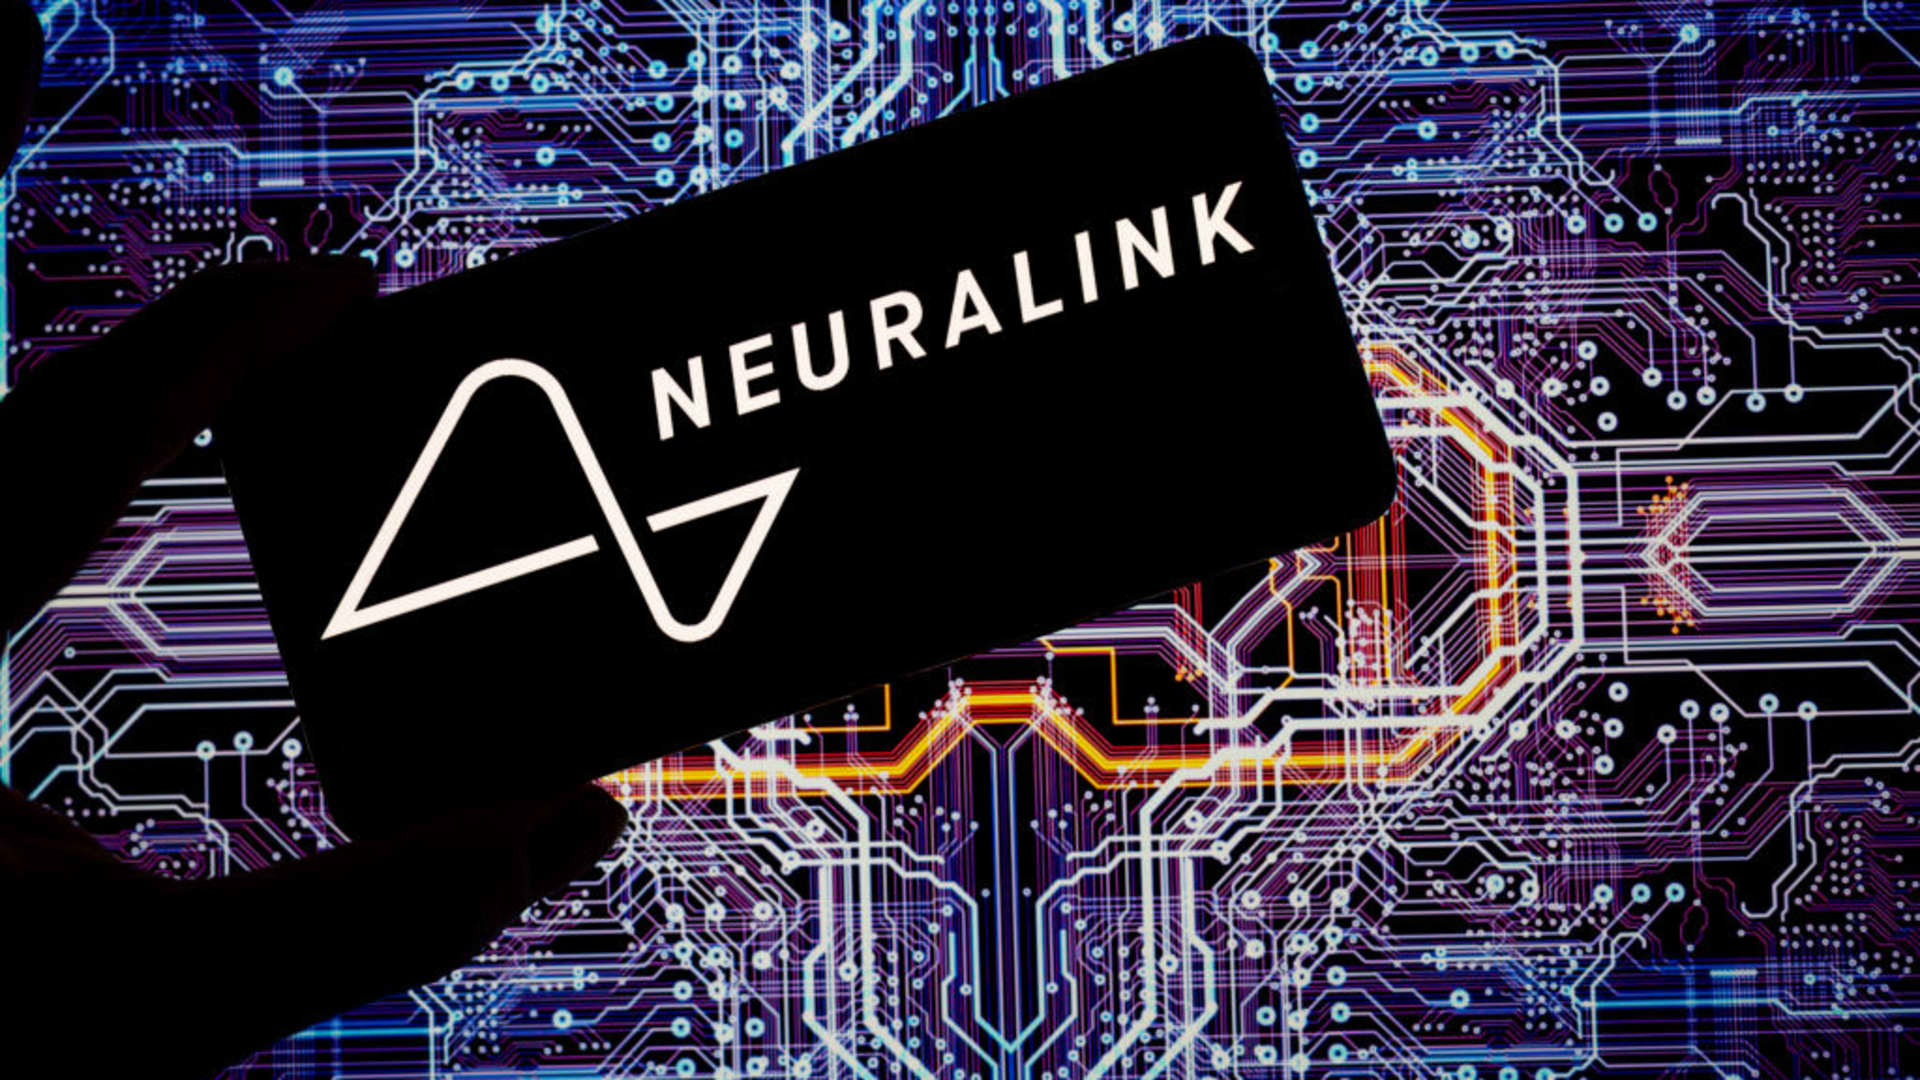 Neuralink’s first in-human brain implant has experienced a problem, company says